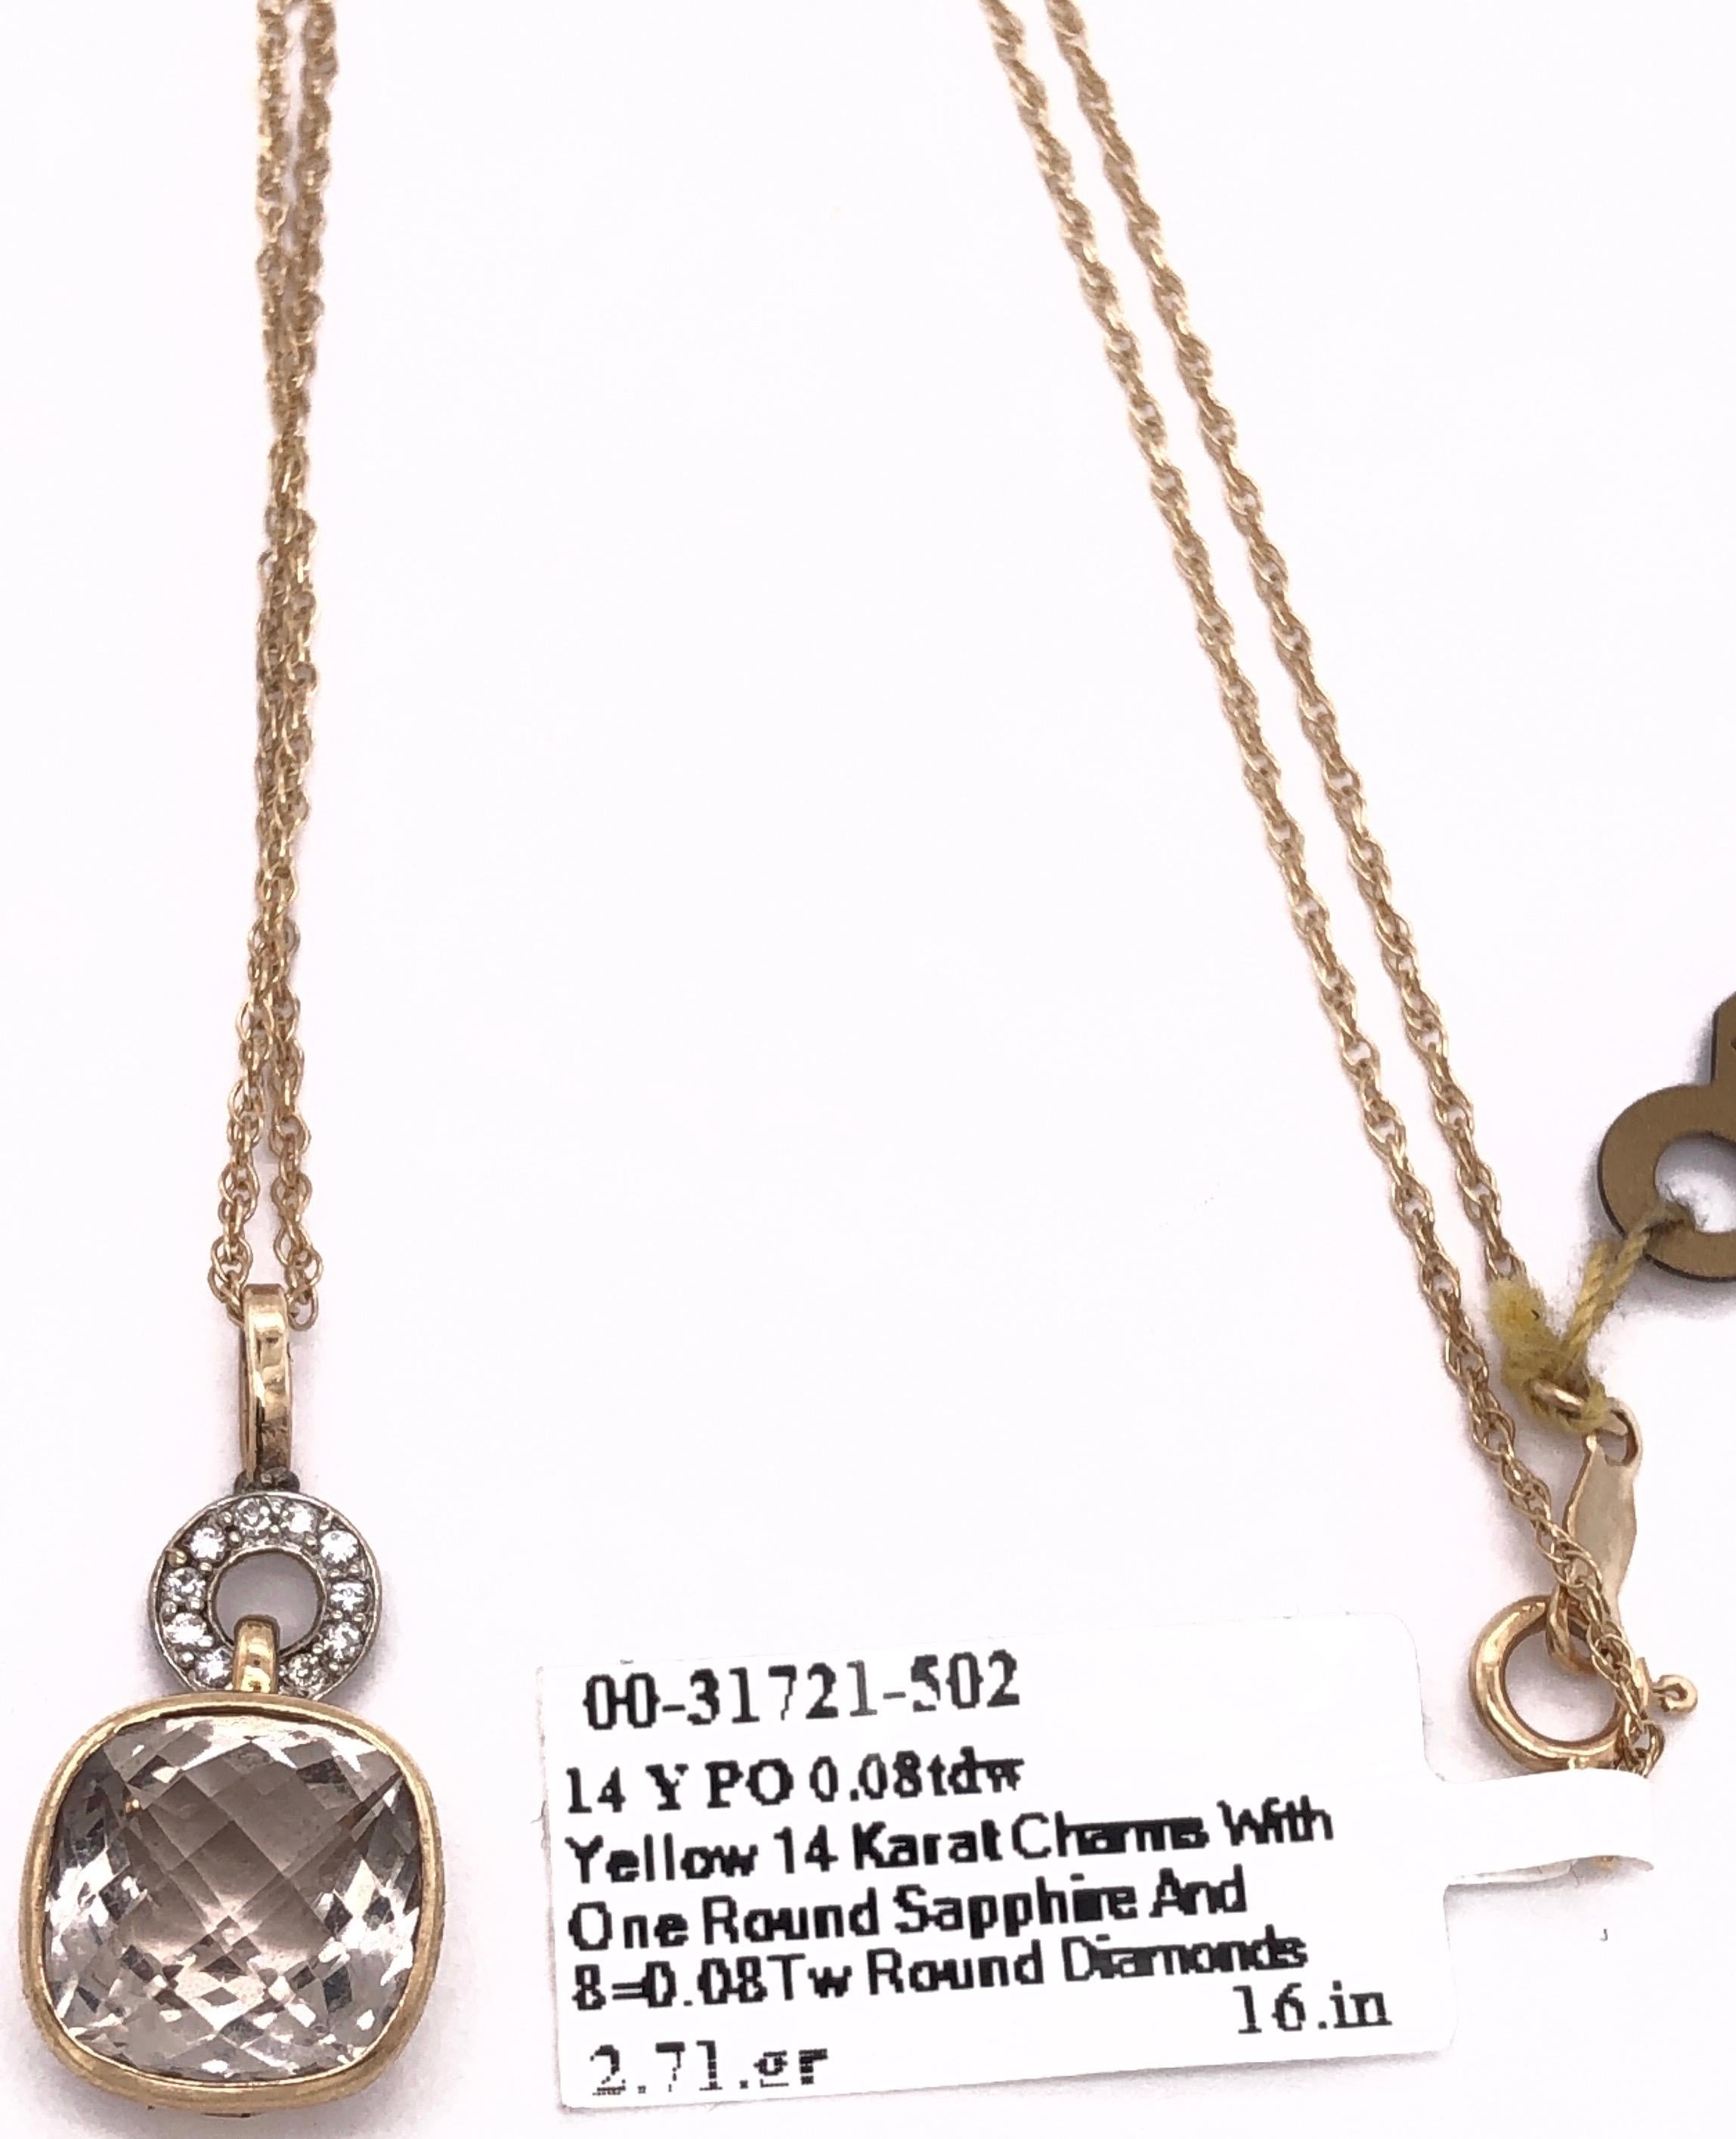 14 Karat Gold Necklace with Round Sapphire and Diamond Pendant For Sale 1